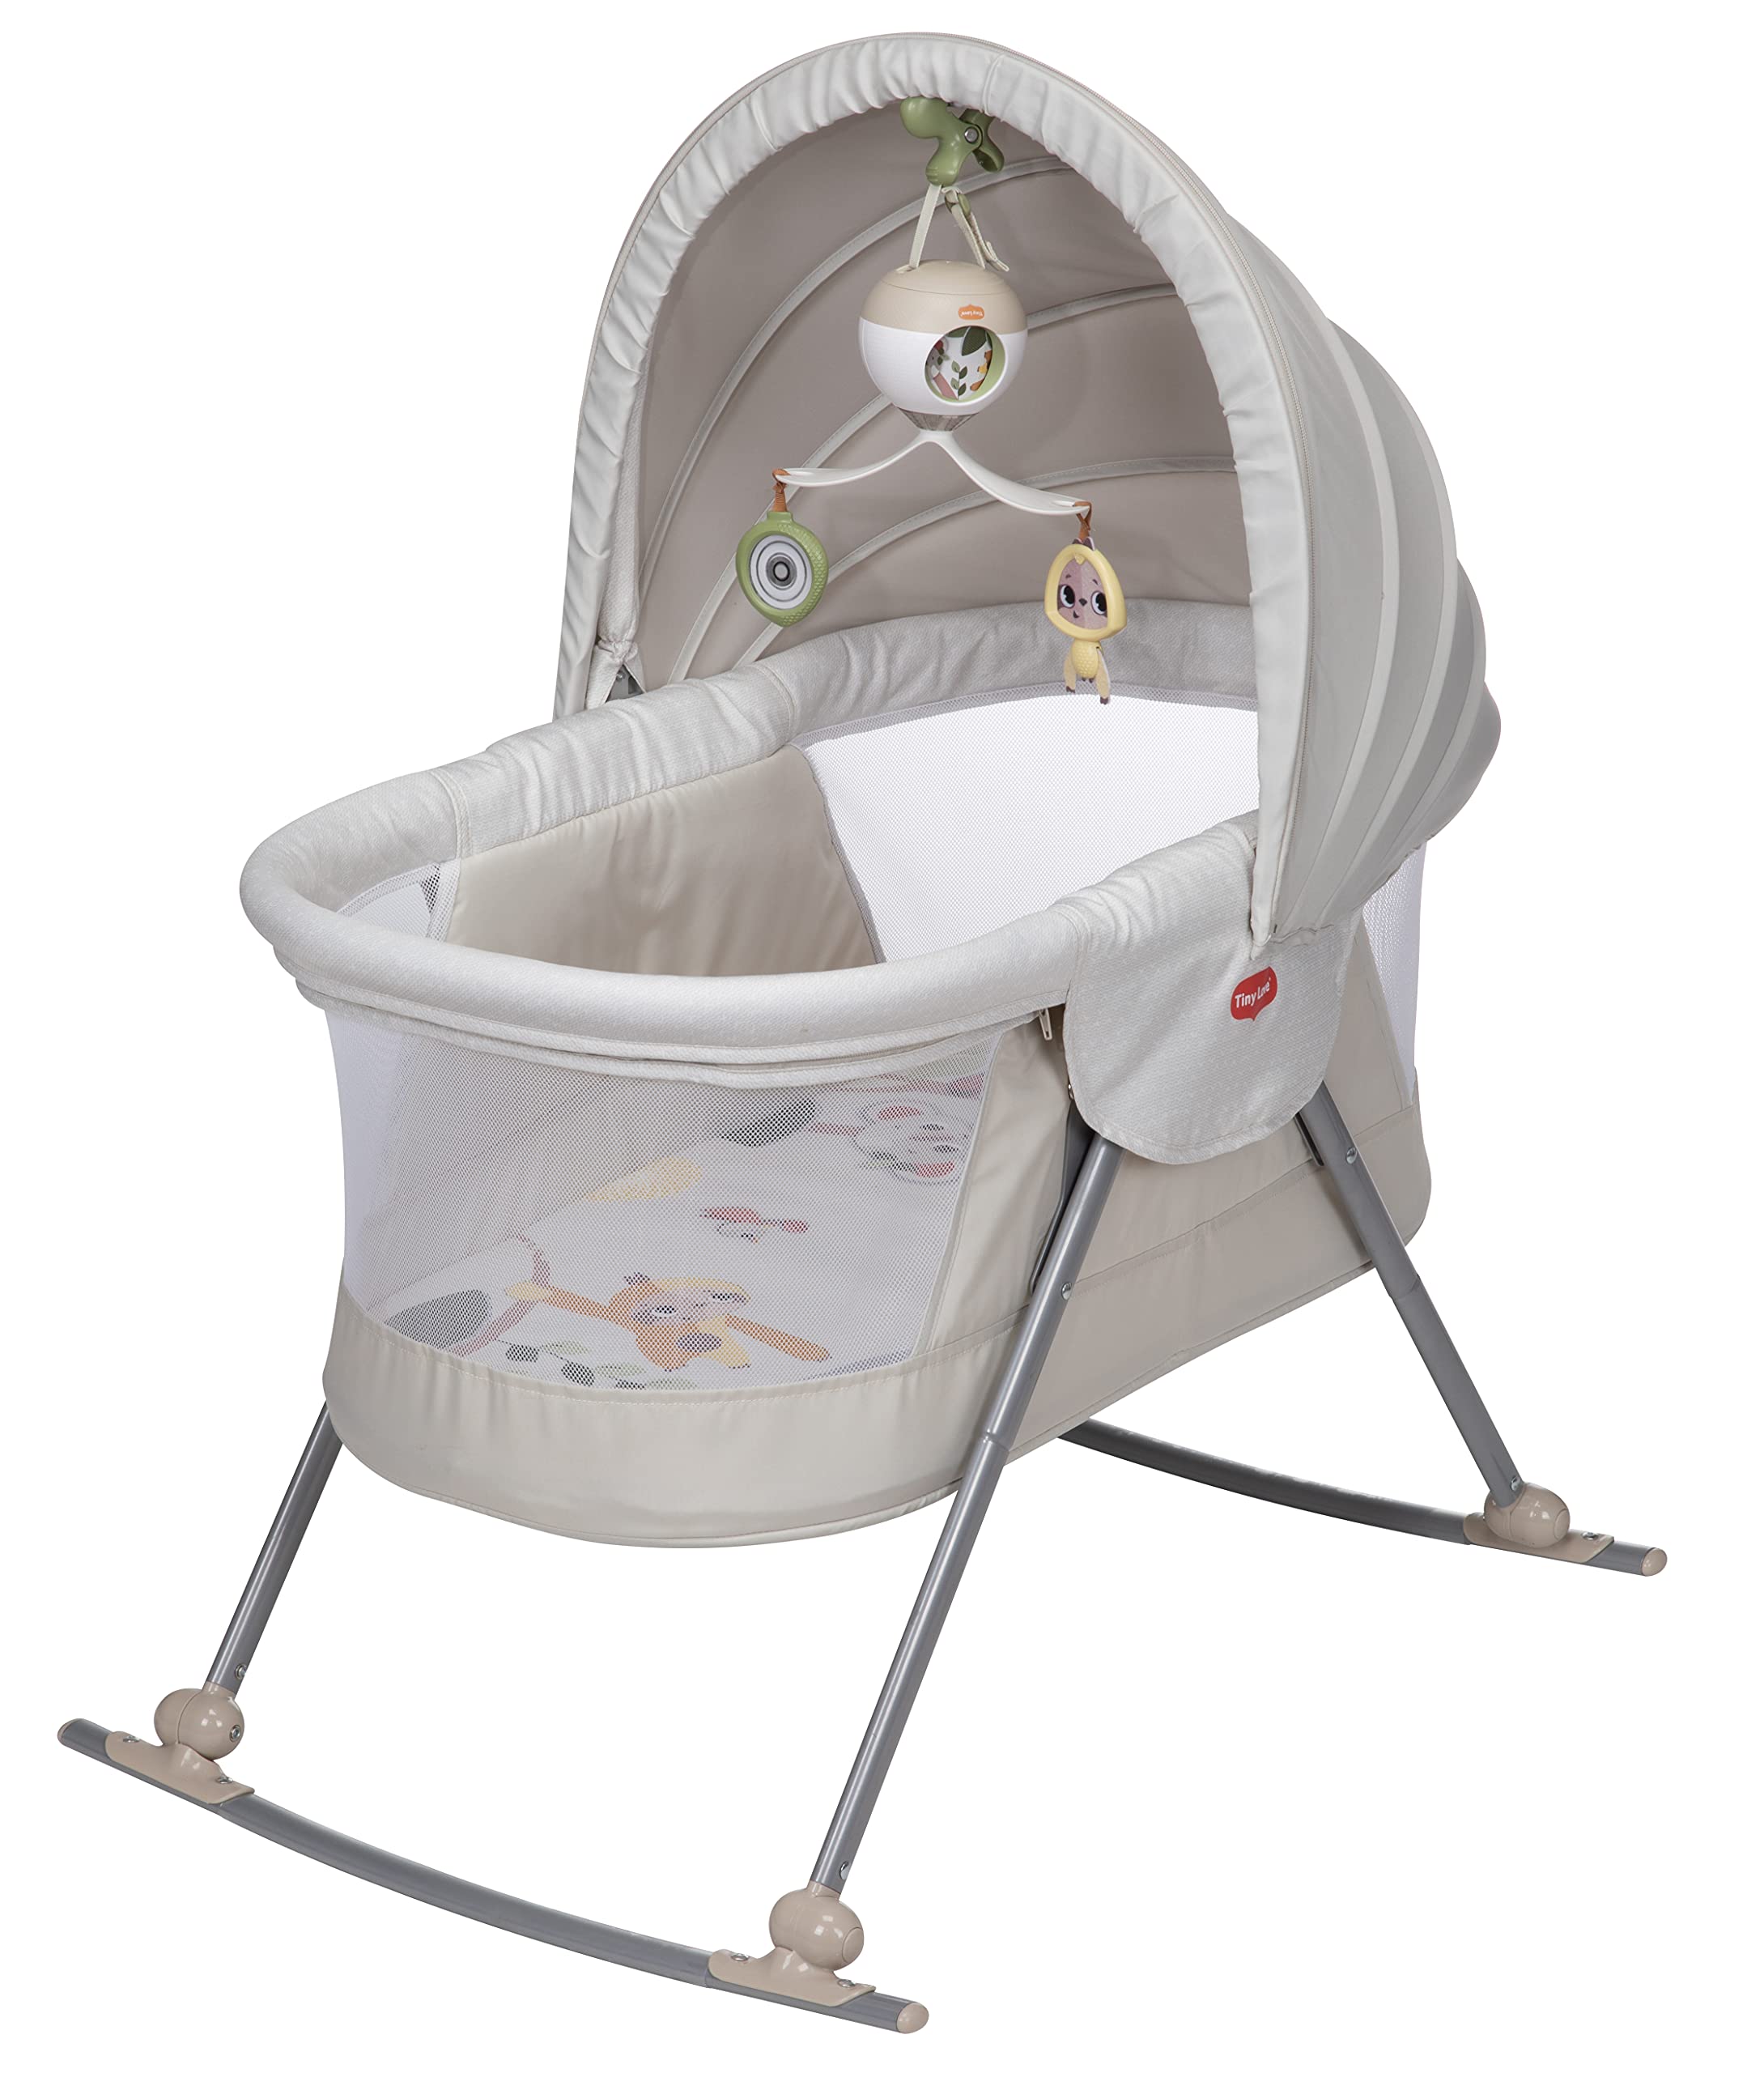 Tiny Love Boho Chic 2-in-1 Take Along Deluxe Bassinet, Rocking, Detachable Inner Playmat, Retractable Canopy